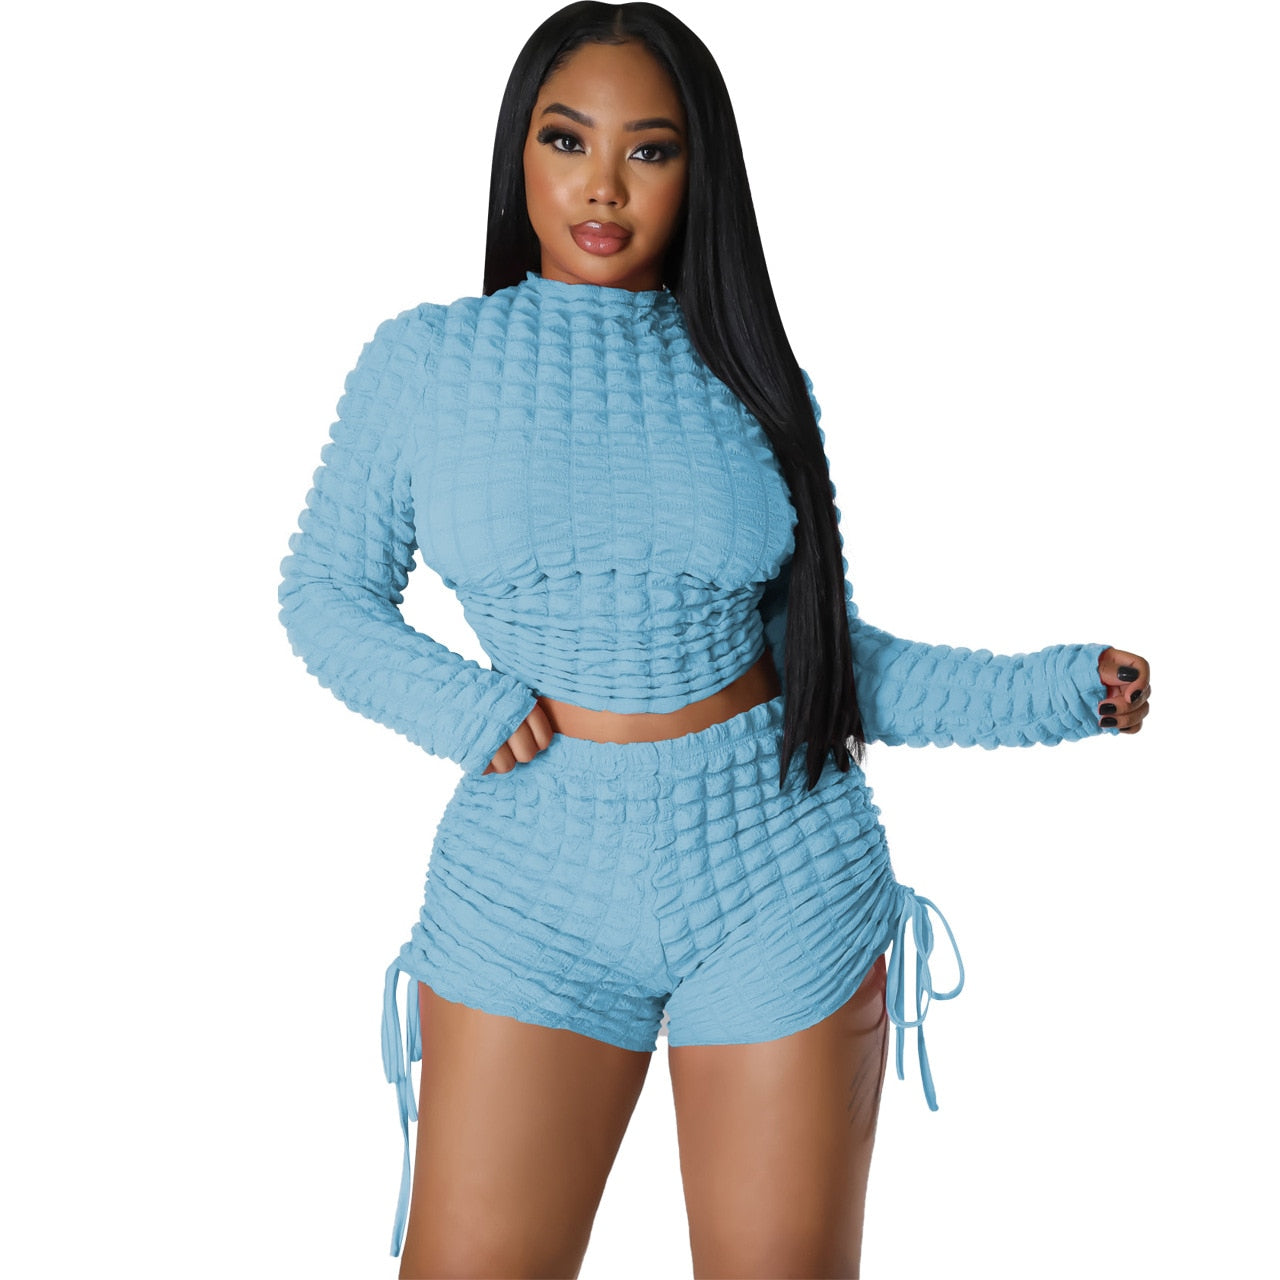 Two Piece Set- Bandage Short Tracksuit Top + Drawstring Shorts Outfit